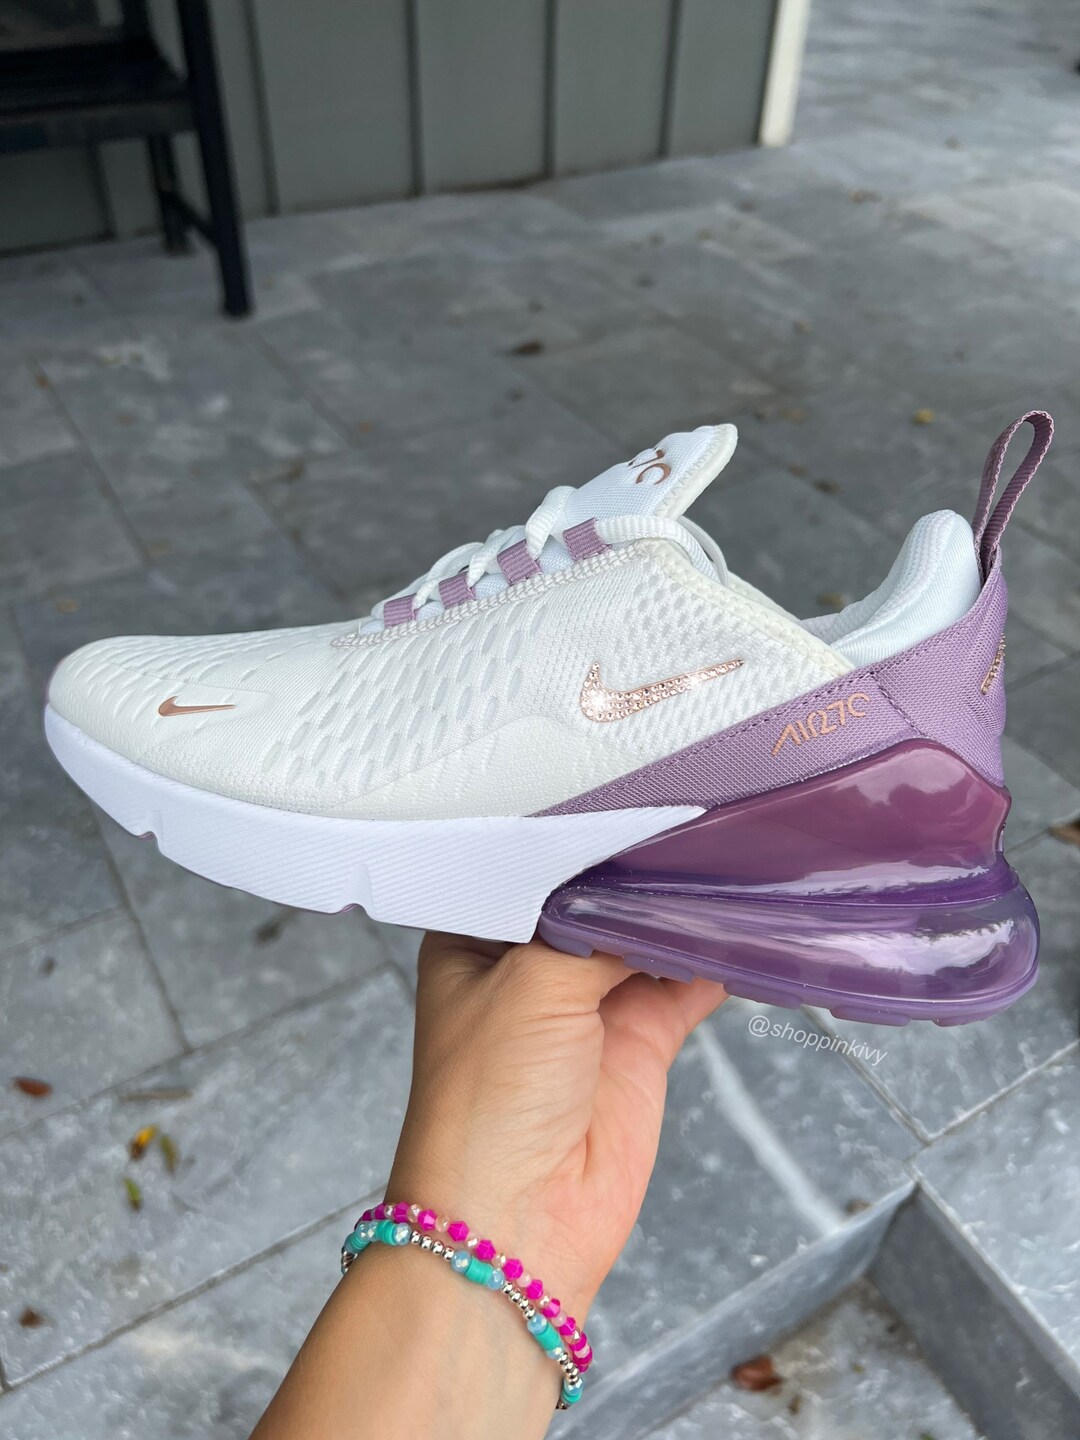 Rose Gold Nike Air Max 270 Sneakers Blinged With Crystals - Etsy